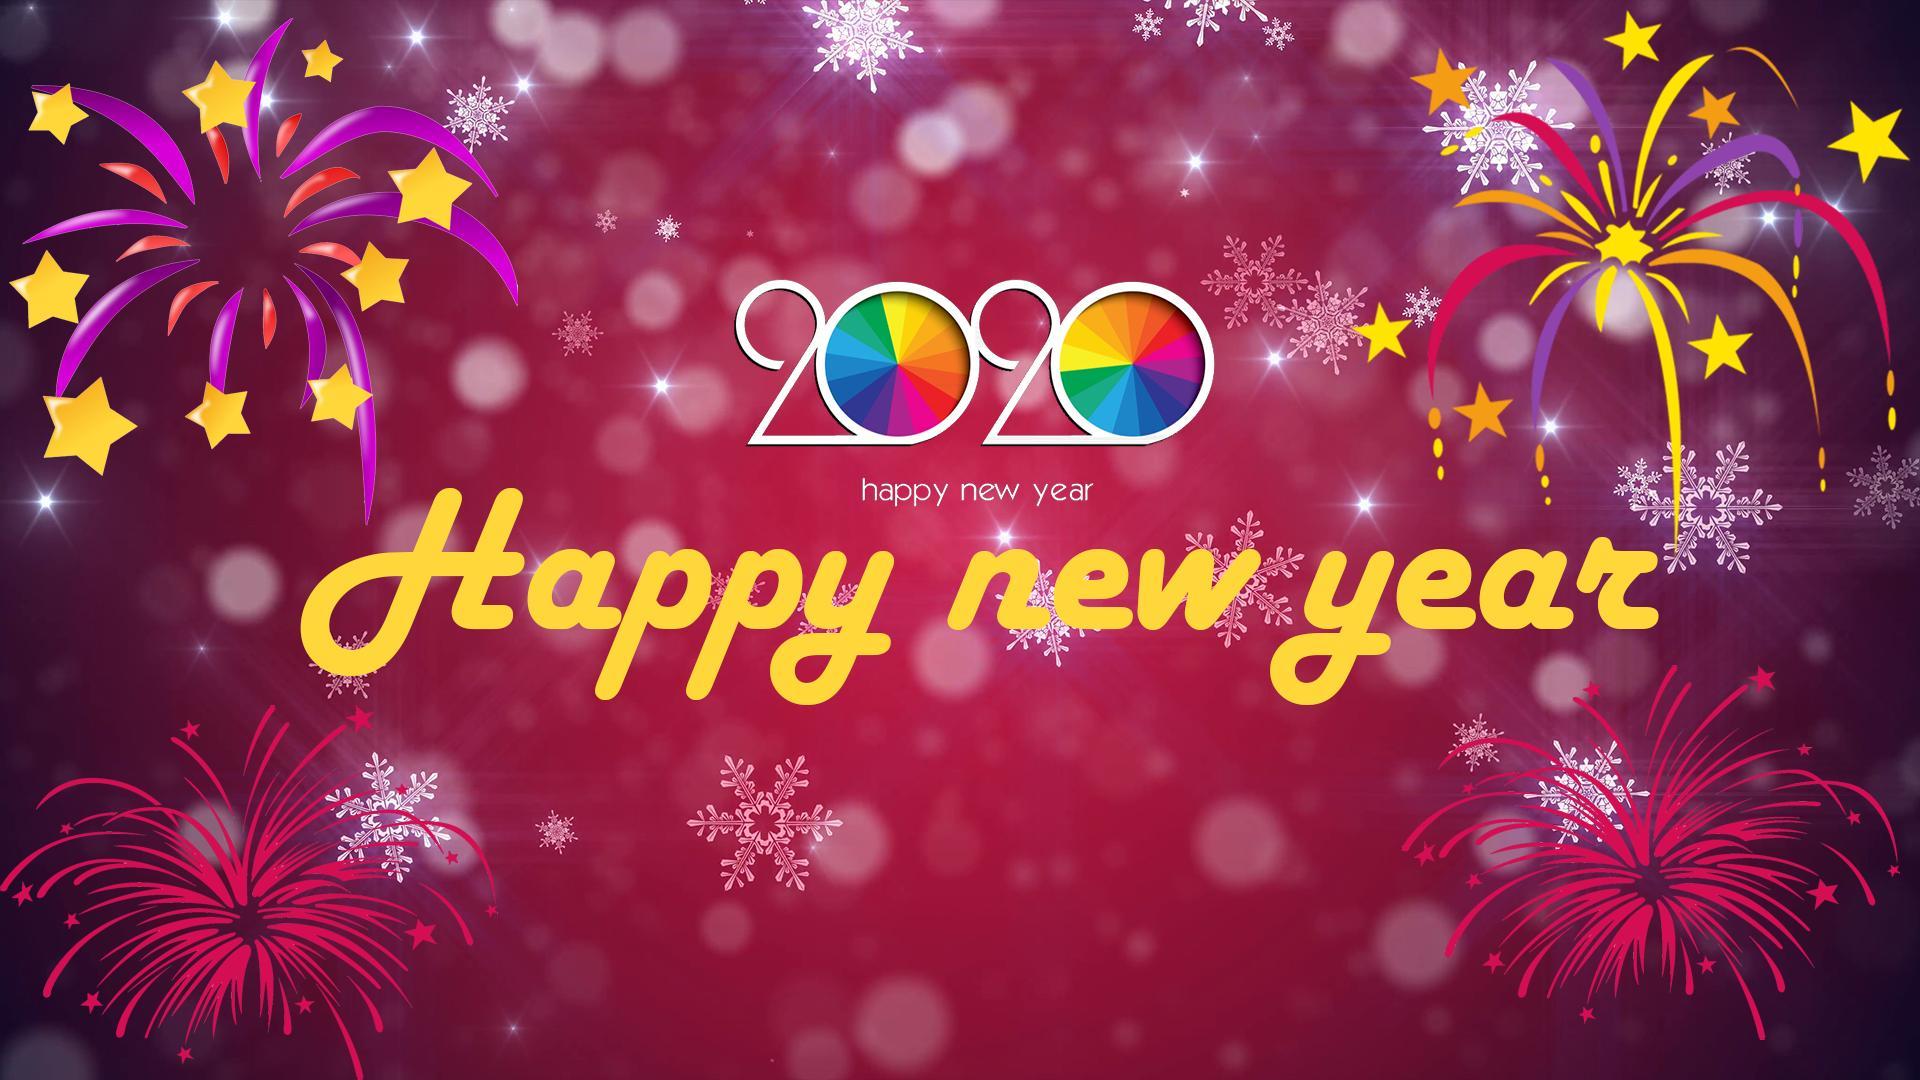 Happy new year 2020 CD banner background HD